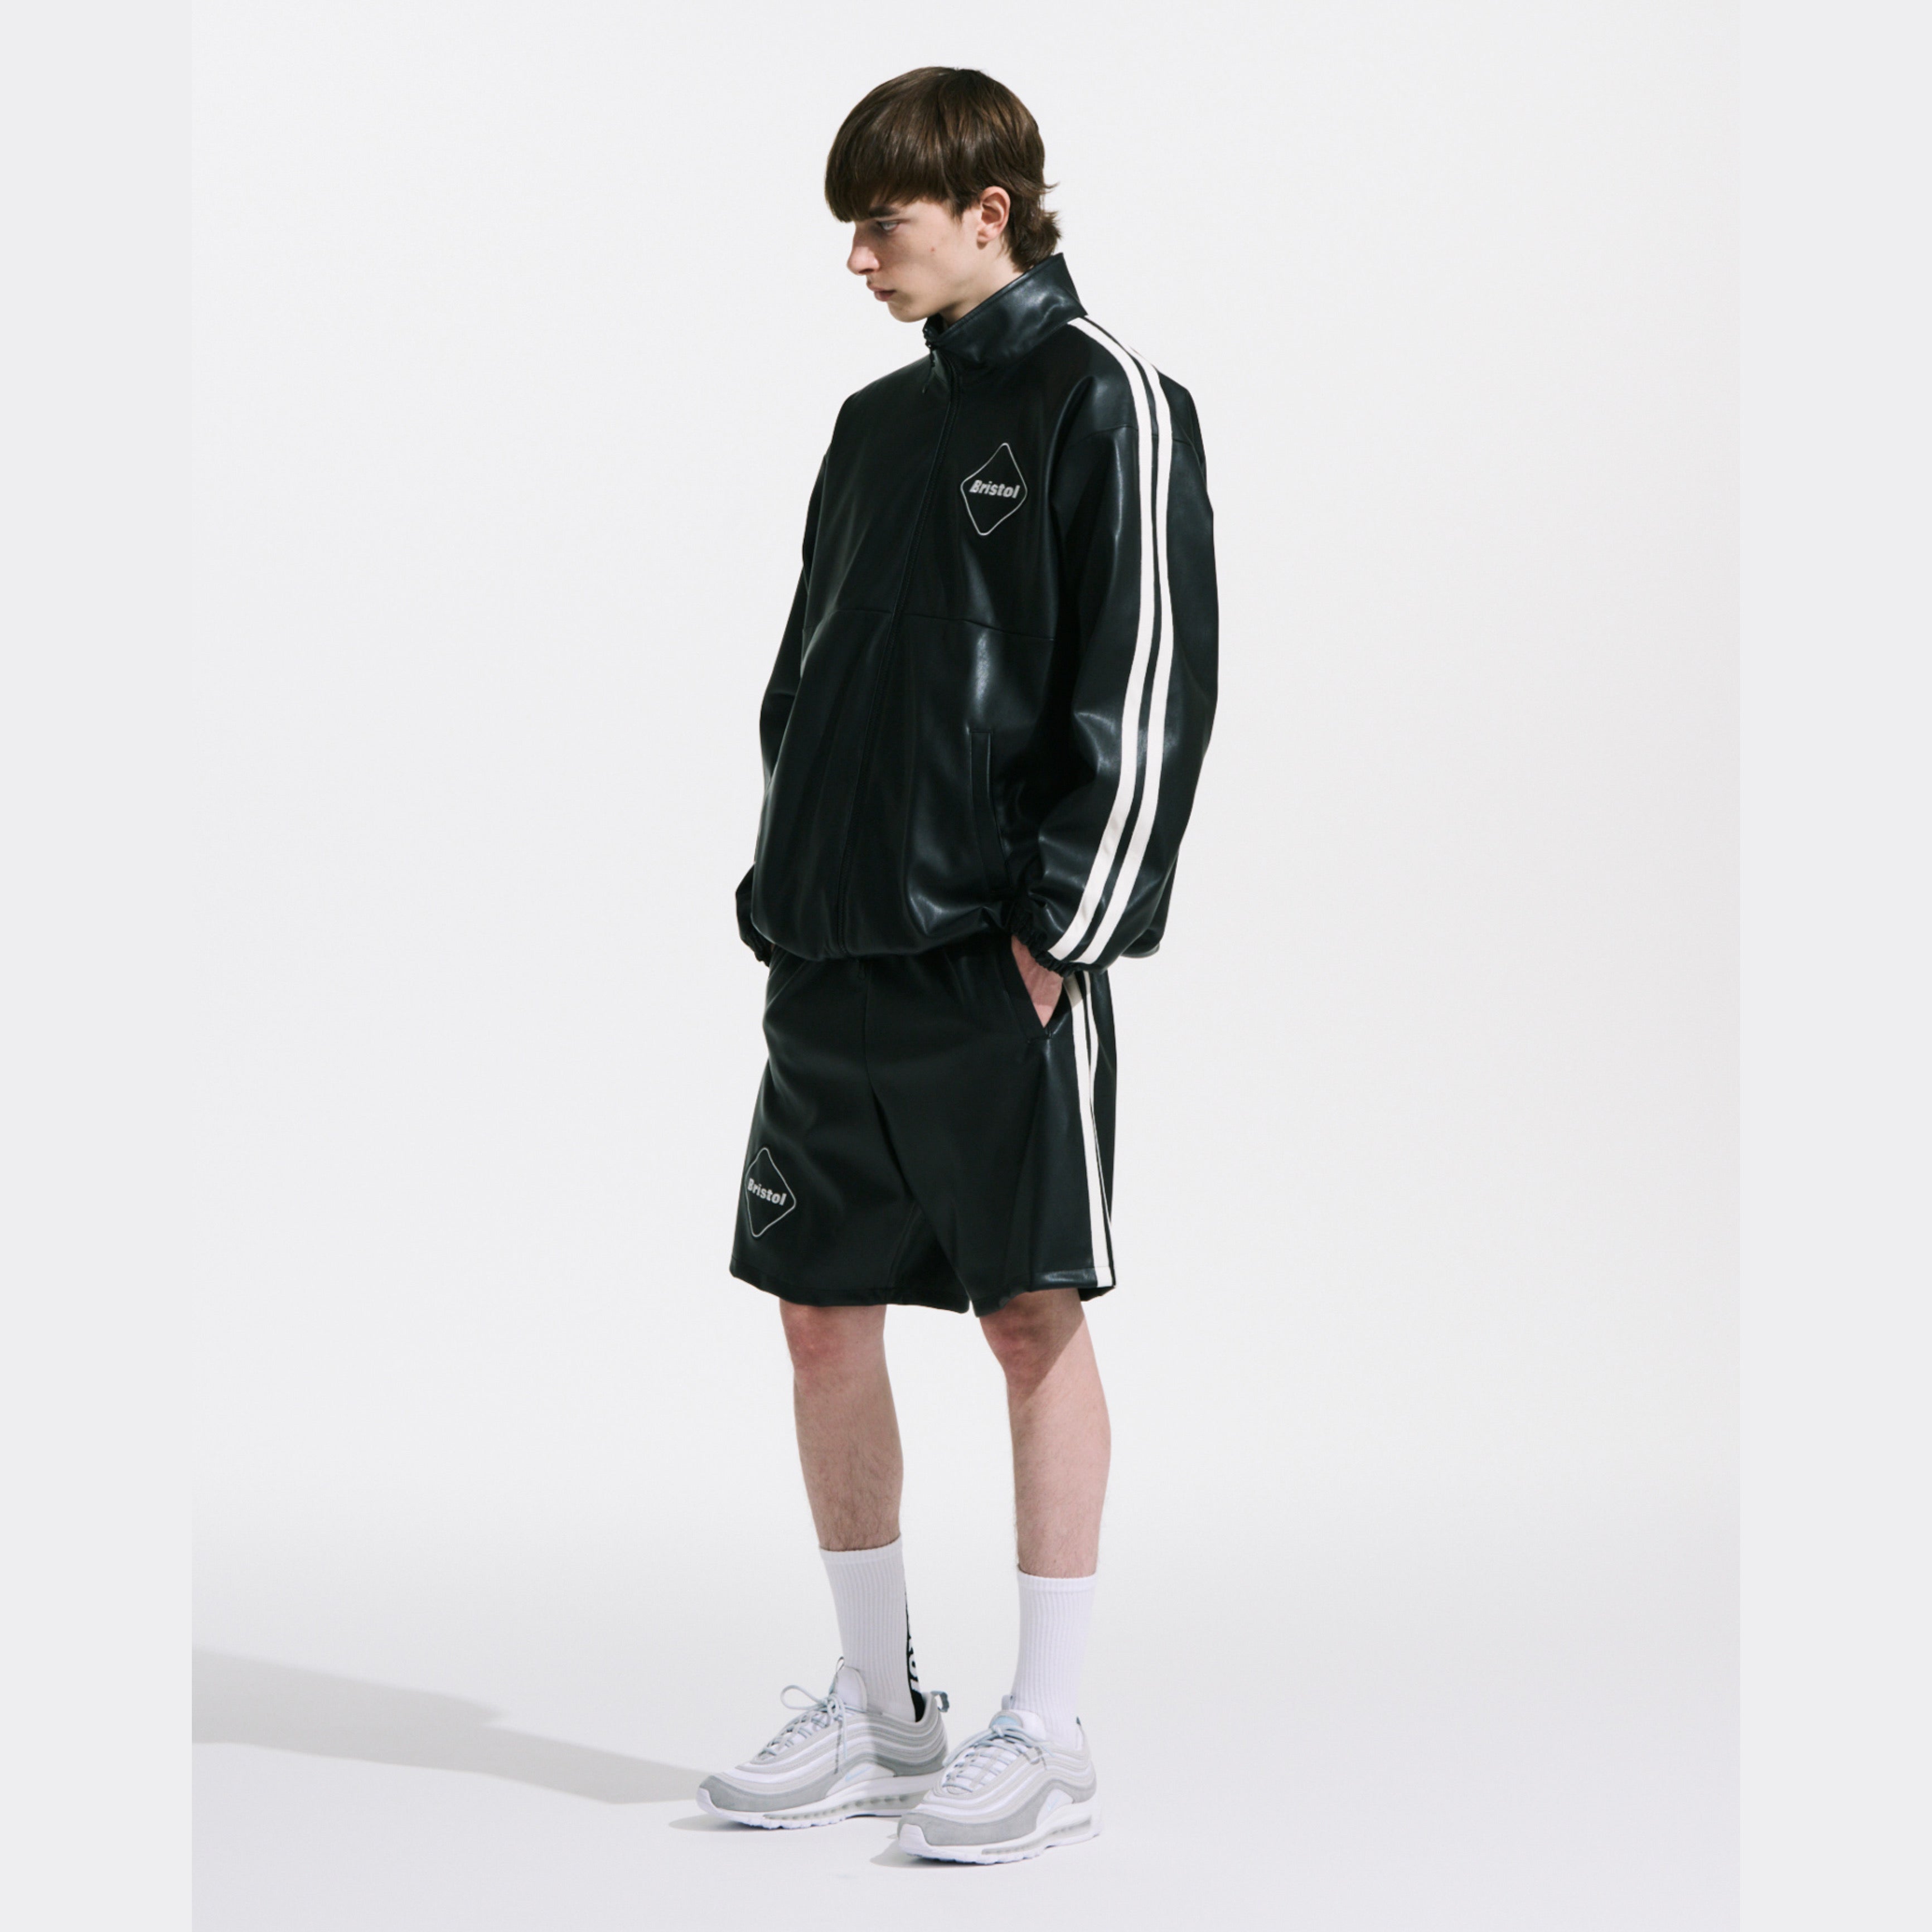 SYNTHETIC LEATHER BLOUSON